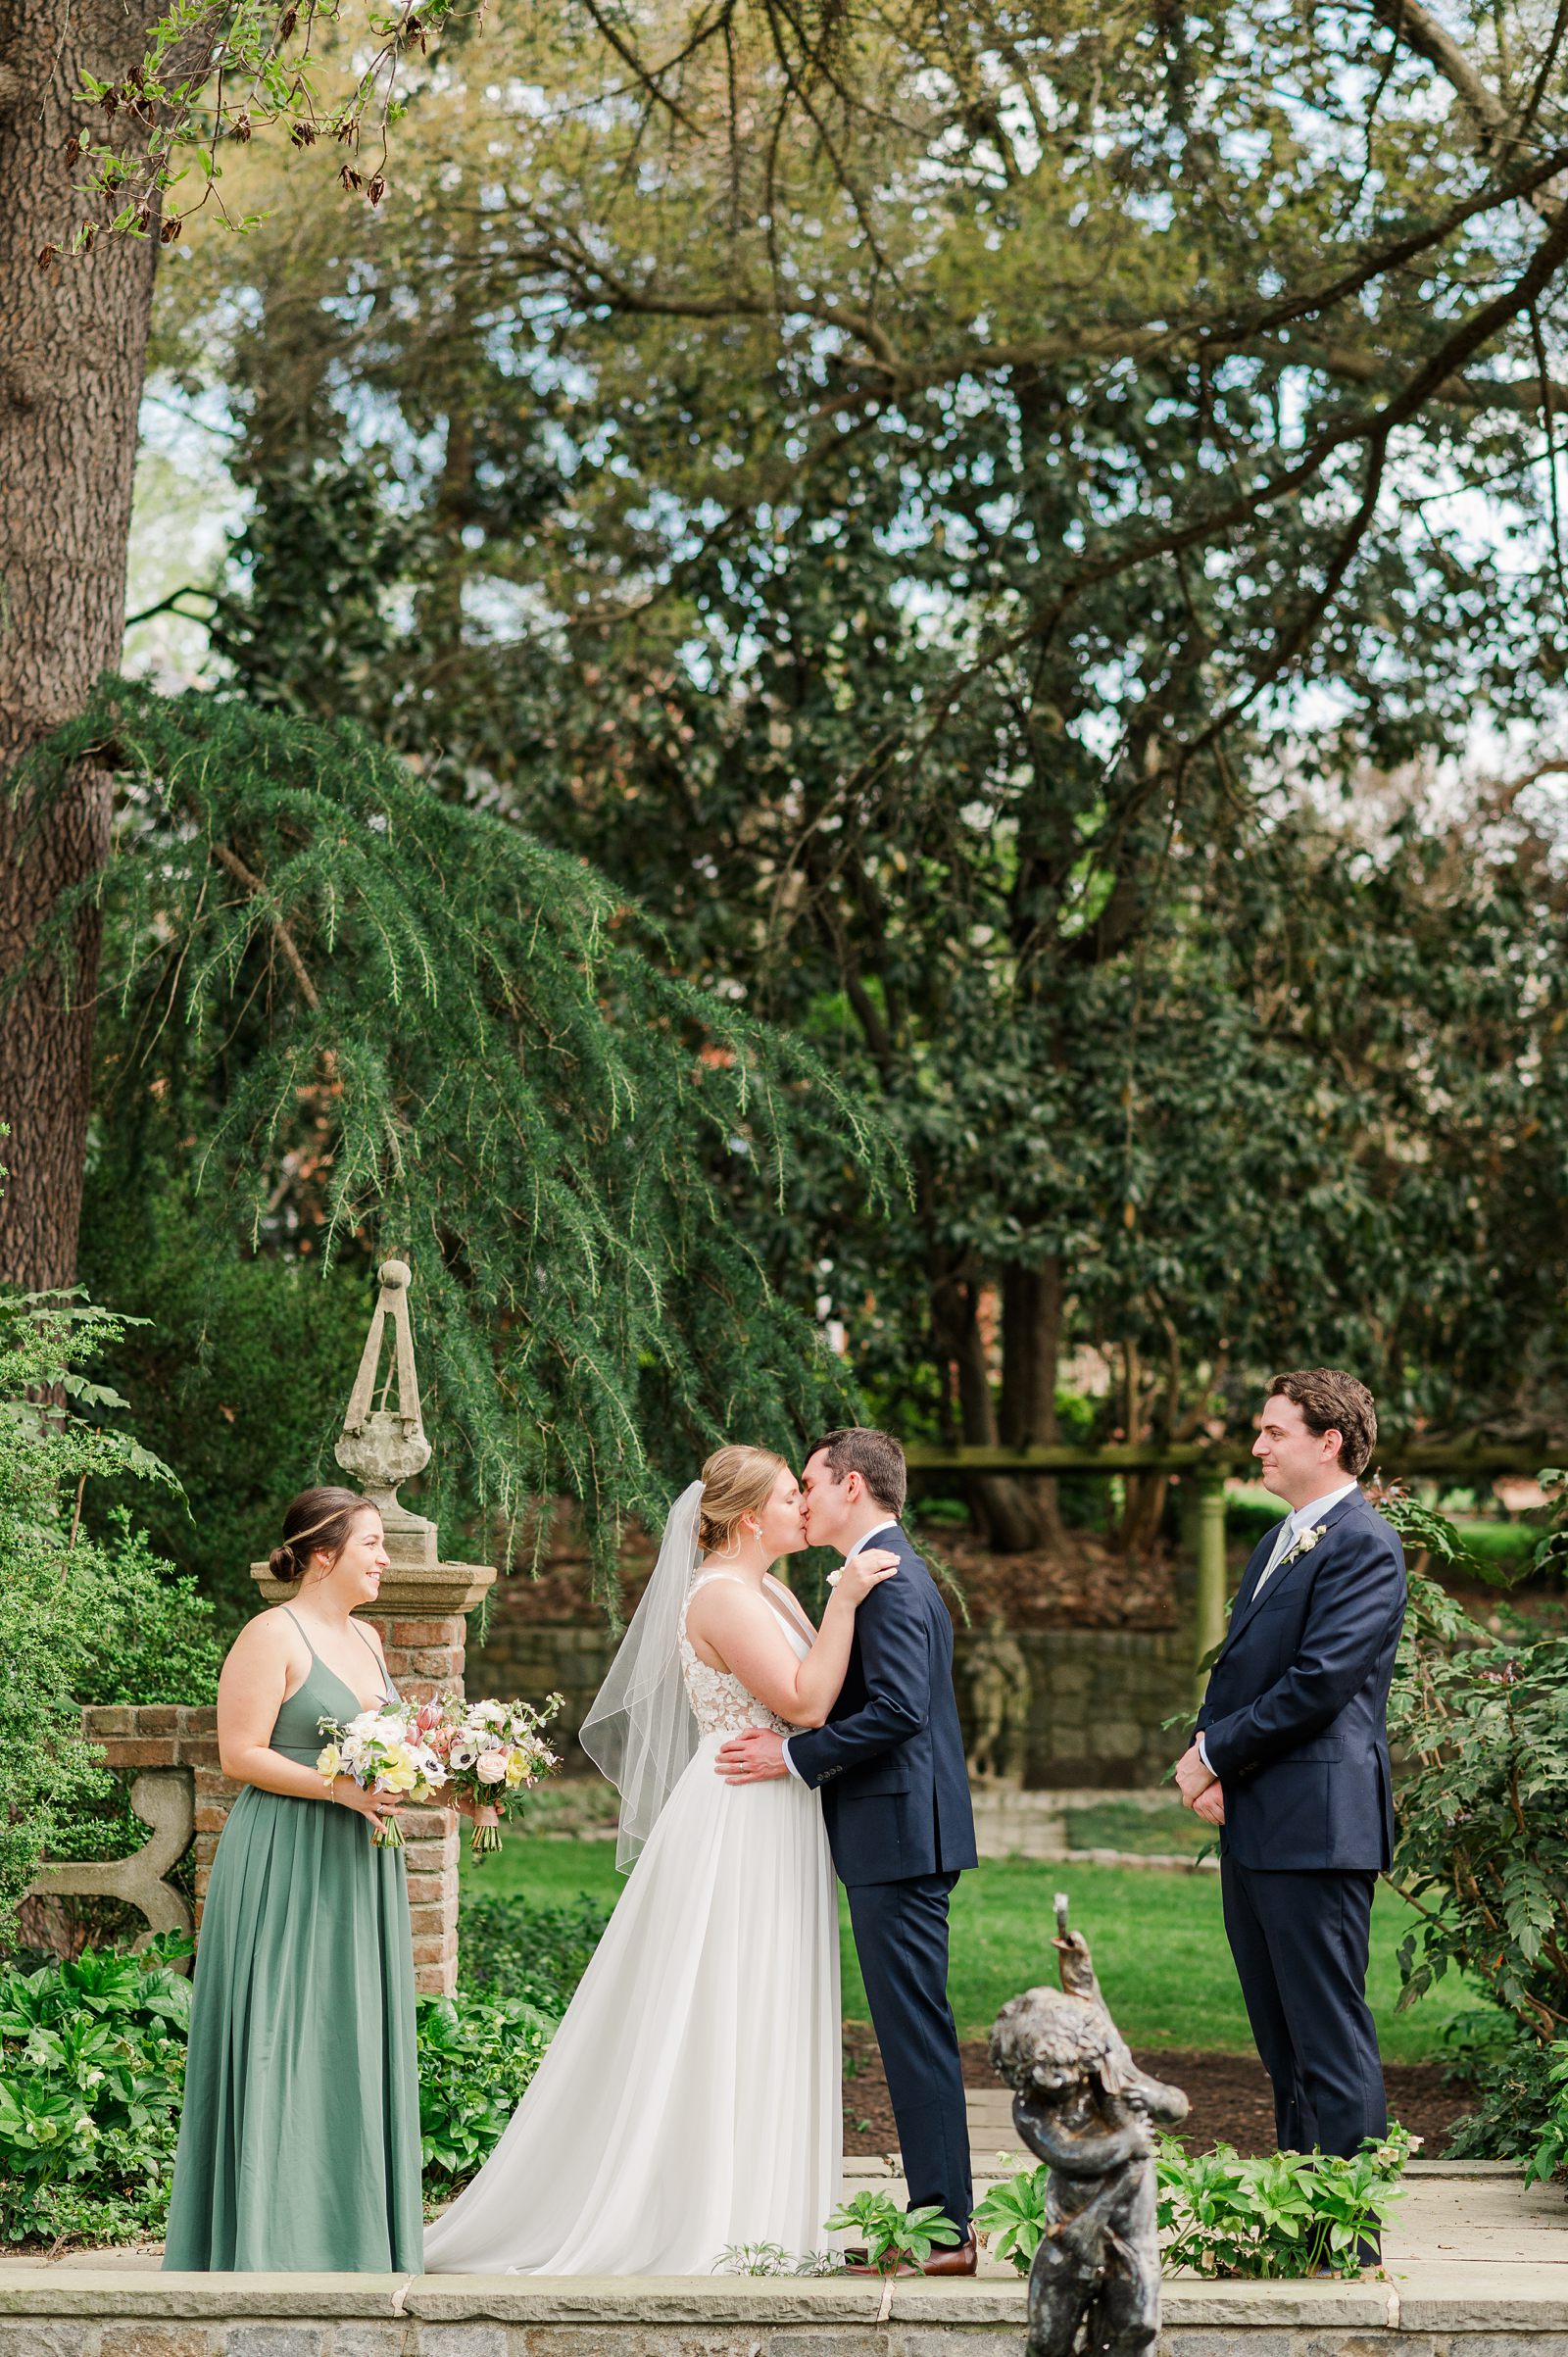 A Spring Intimate Virginia House Ceremony by Richmond Wedding Photographer Kailey Brianne Photography.